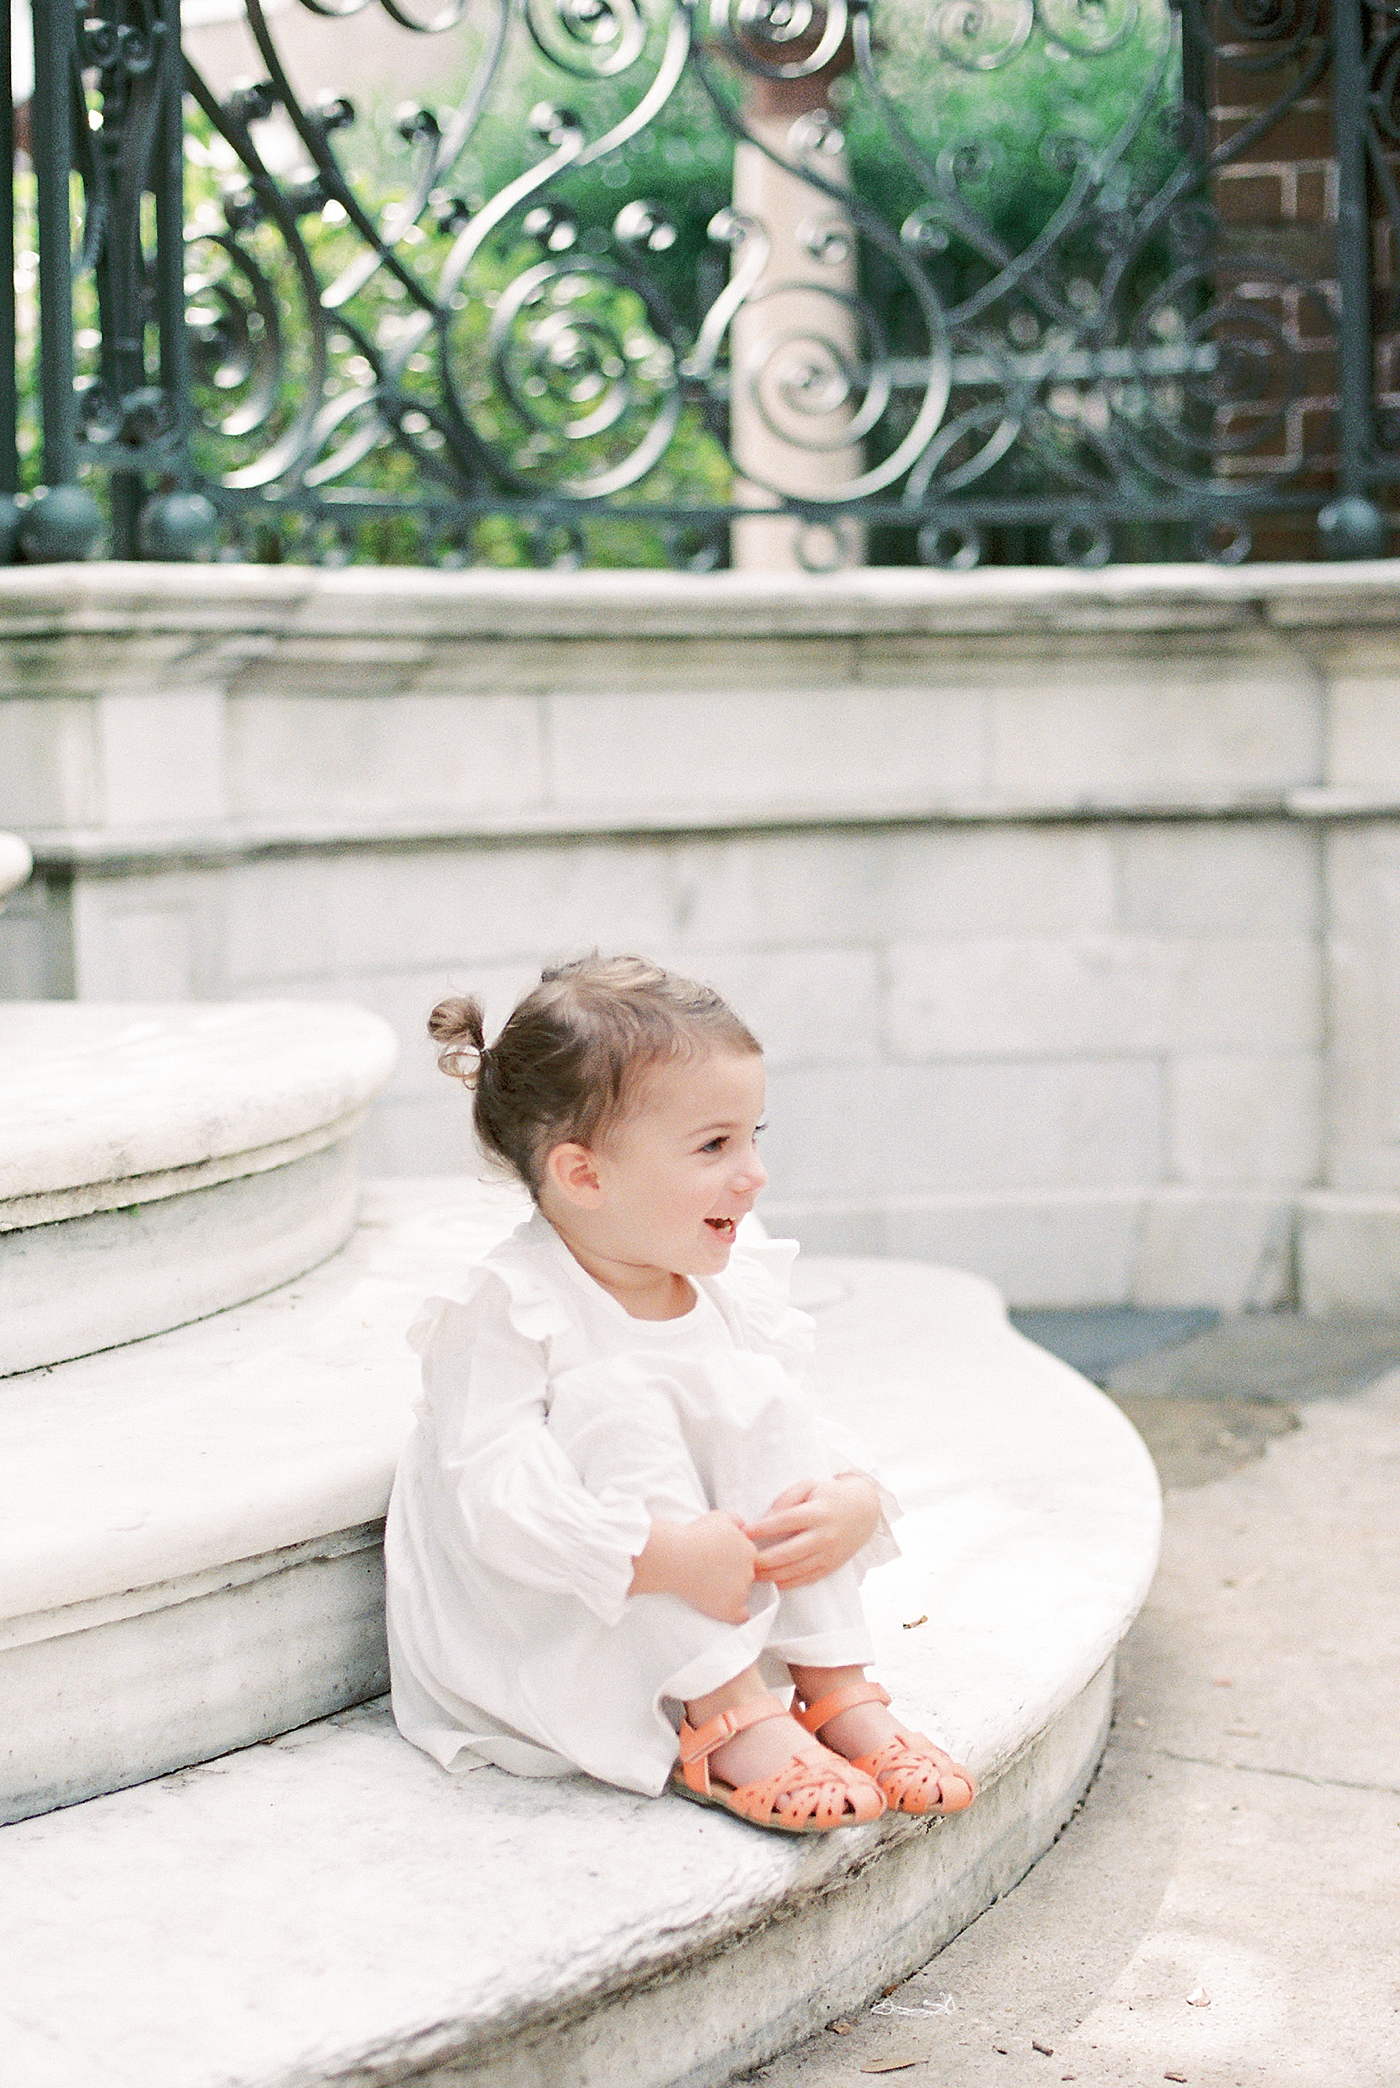 Toddler girl in a white dress sitting on a stoop | Photo by Caitlyn Motycka Photography